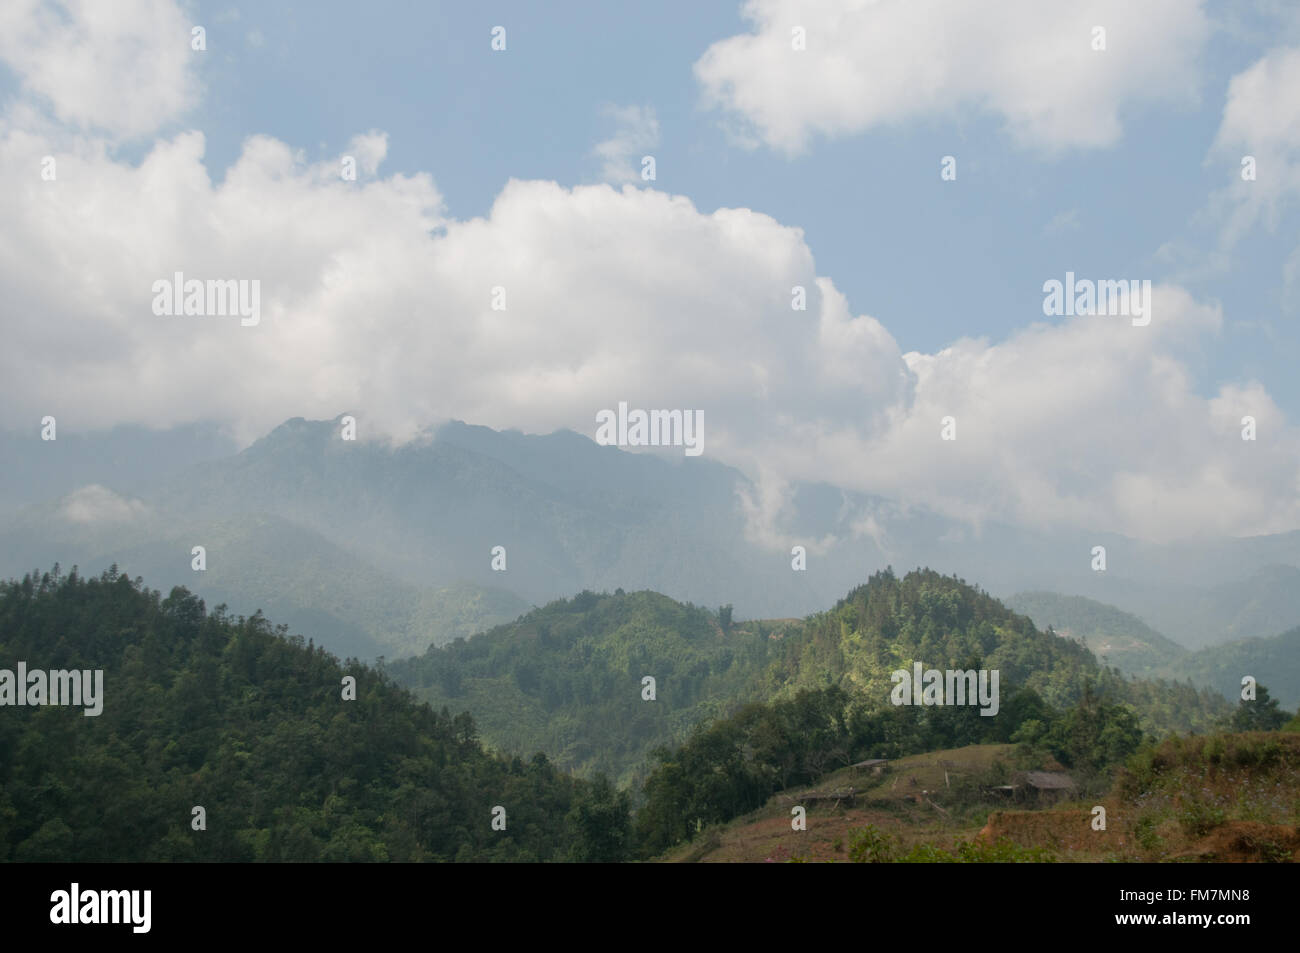 A view of the rice fields and hills of Sapa, Vietnam Stock Photo